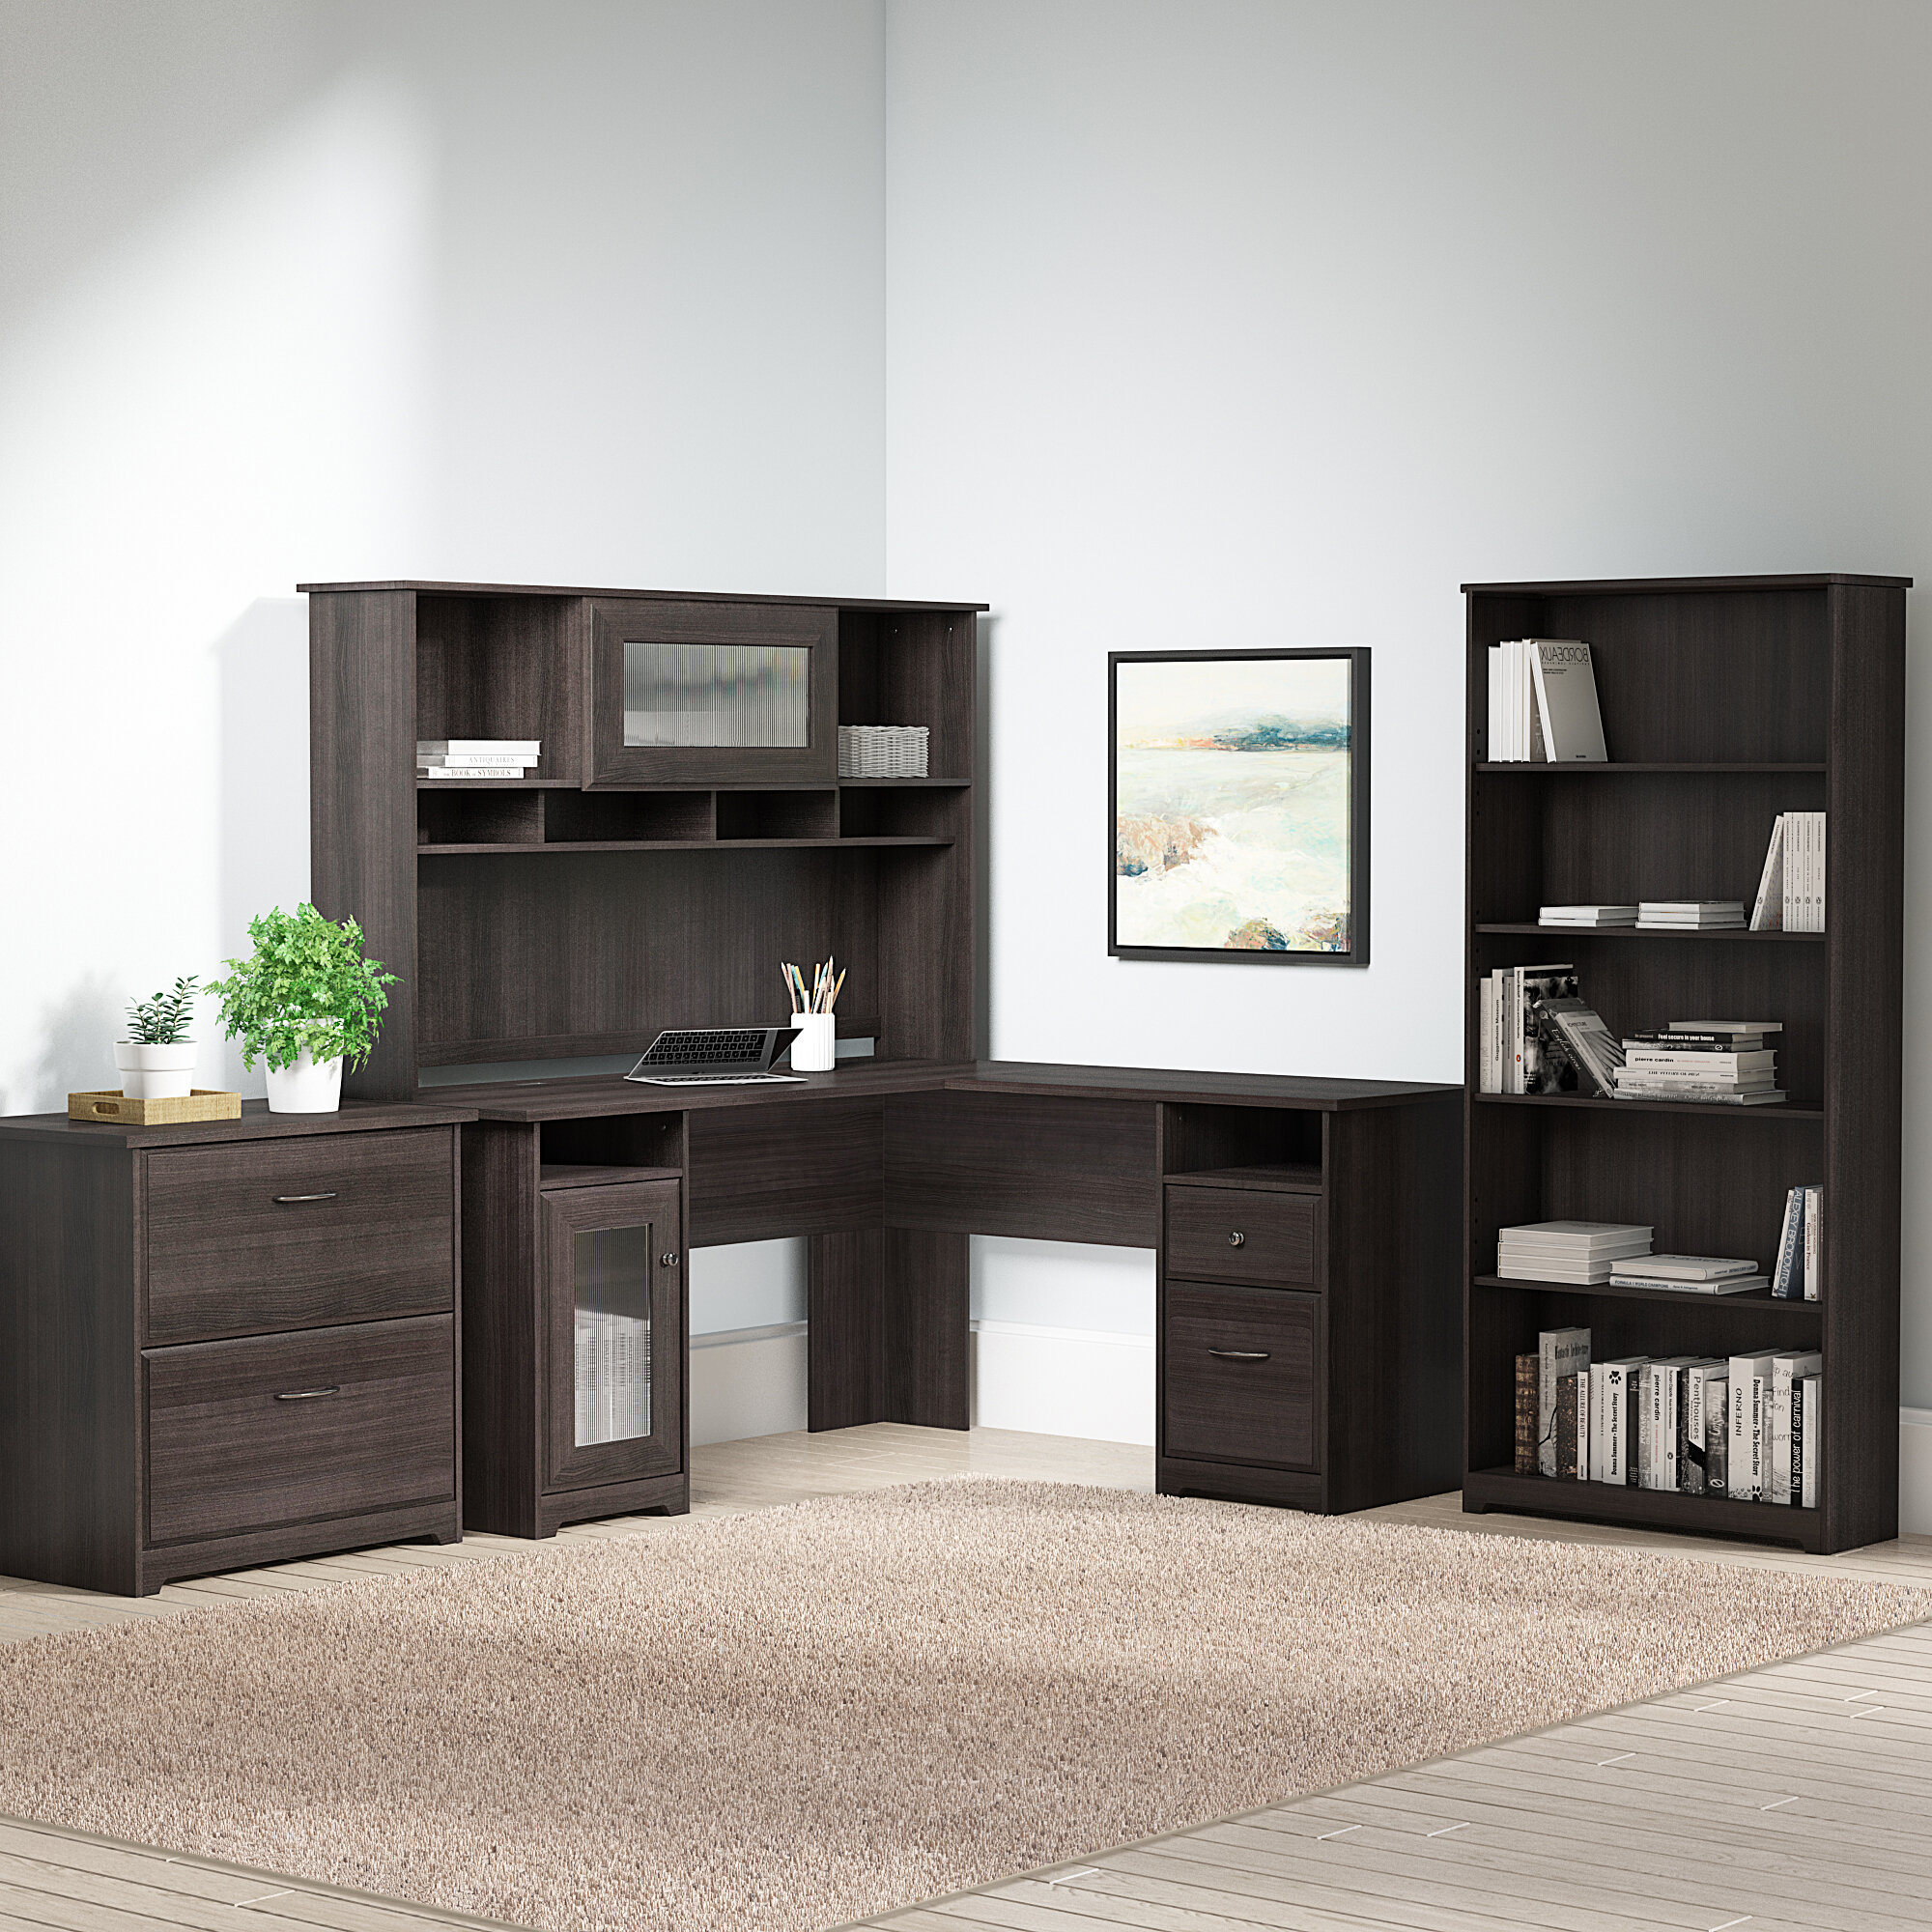 Featured image of post Gray Office Furniture Sets : Explore our favorite furniture collections &amp; find the one for you.